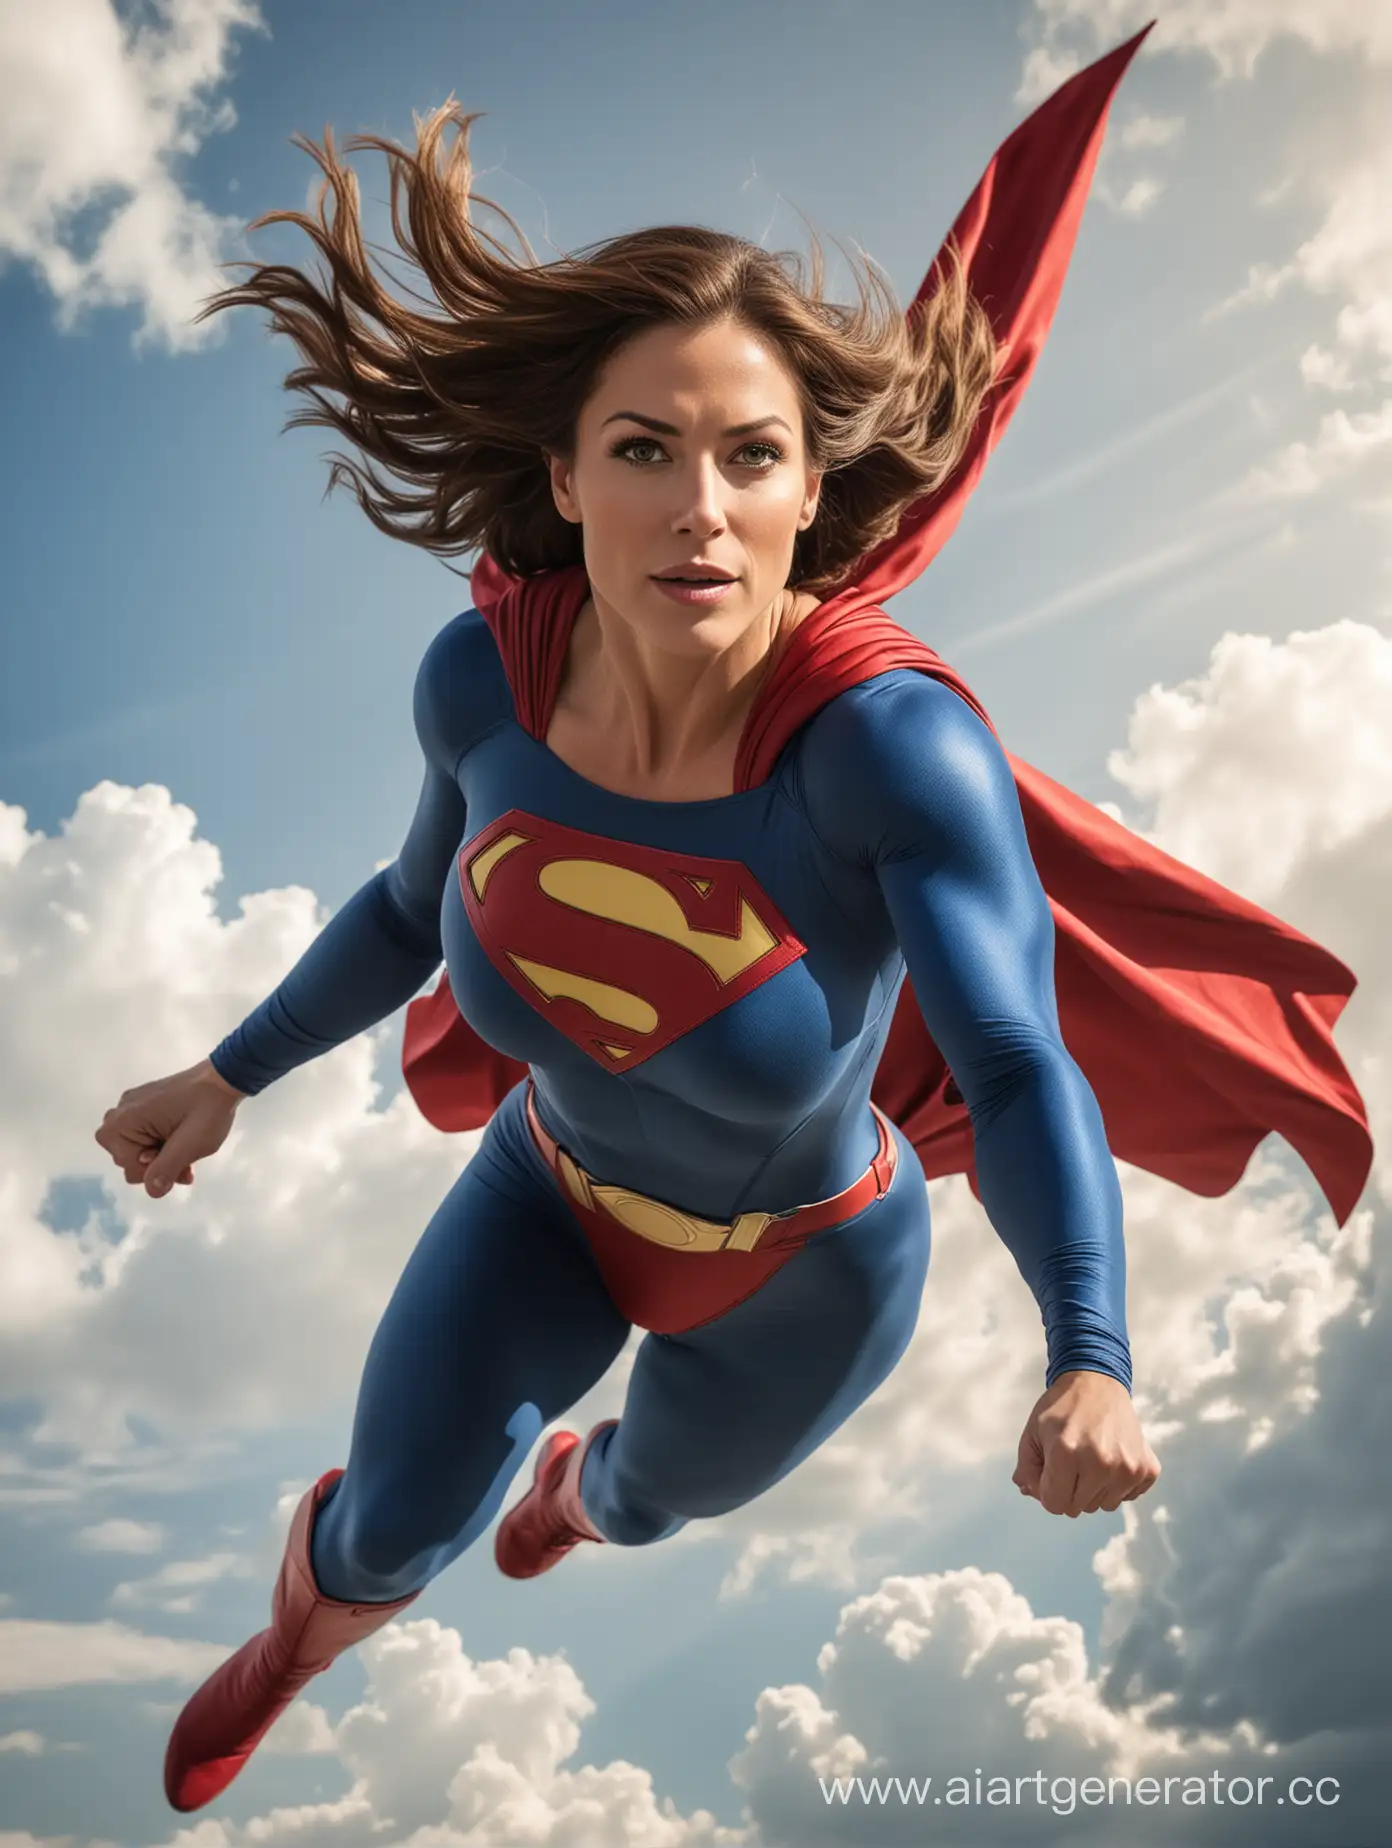 Muscular-MiddleAged-Woman-in-Classic-Superman-Costume-Soaring-Through-Clouds